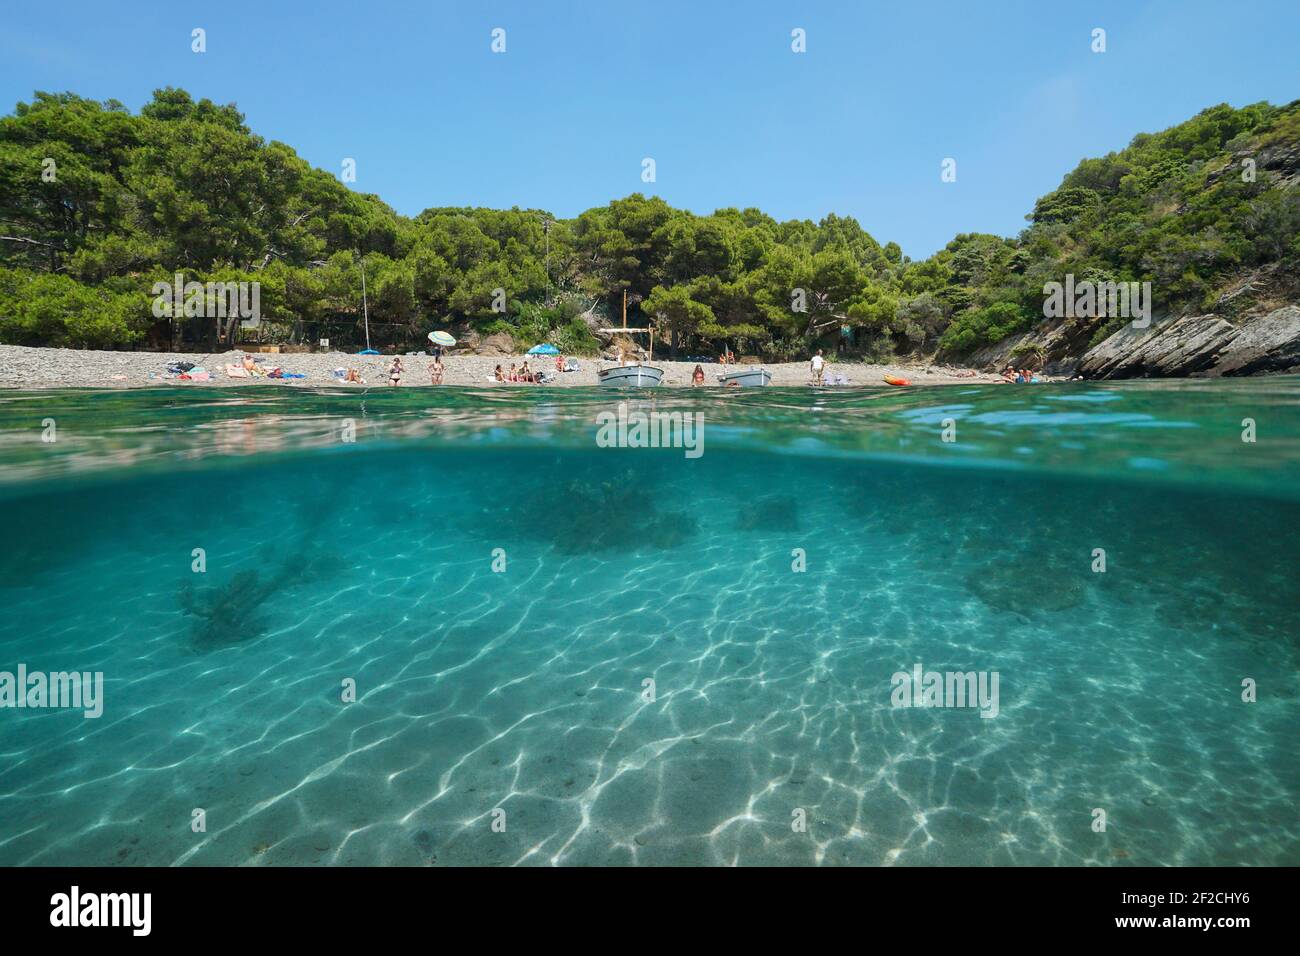 Mediterranean sea vacations in Spain, tranquil cove with tourists on the beach, split view over and under water surface, Costa Brava, Catalonia Stock Photo